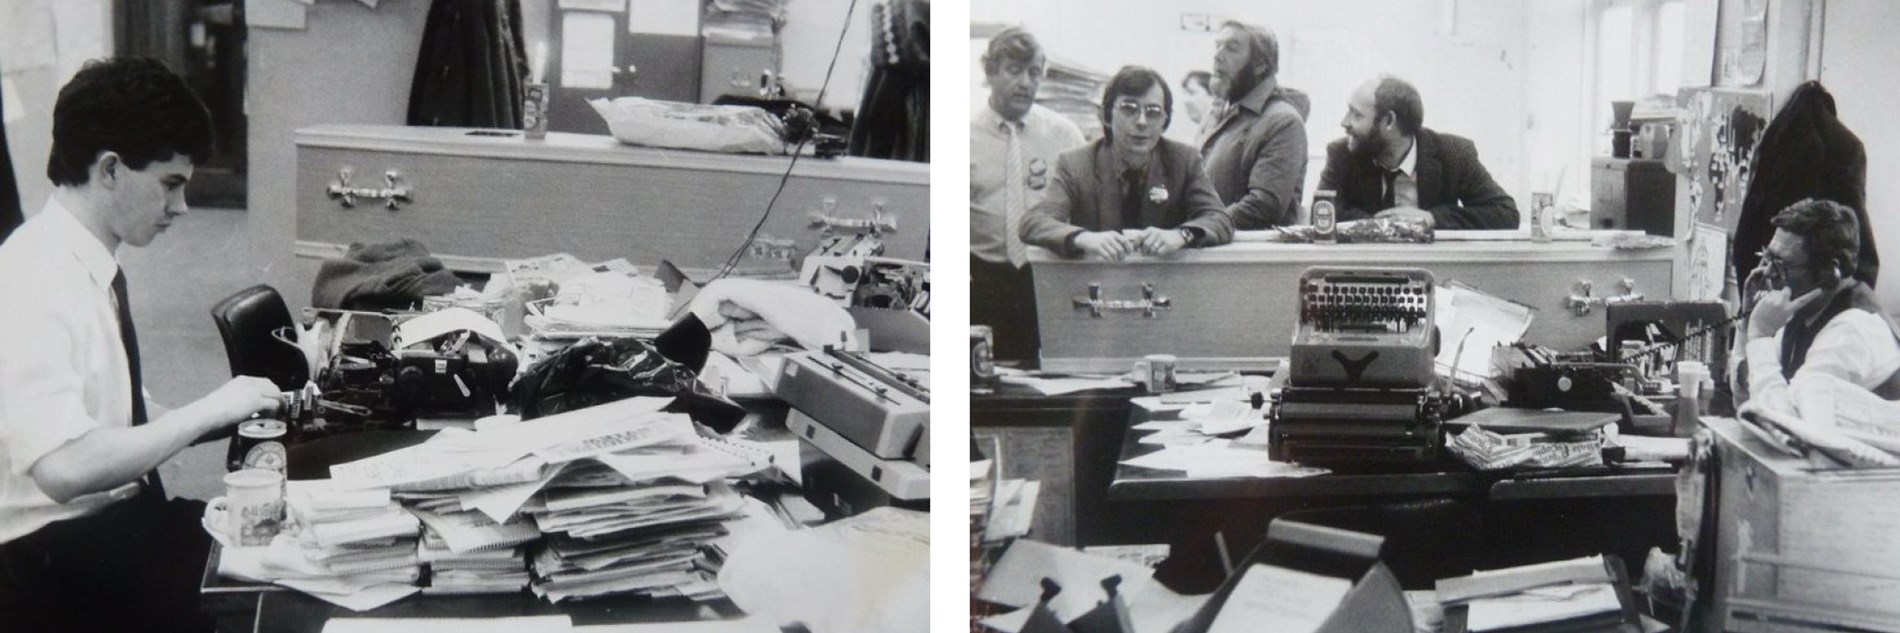 A composite of two black and white photographs. One shows a journalist working at a typewriter on a desk covered with papers - in the background is an empty coffin. The other shows journalists leaning on the coffin while another reporter takes a phone call at his desk in front of it.